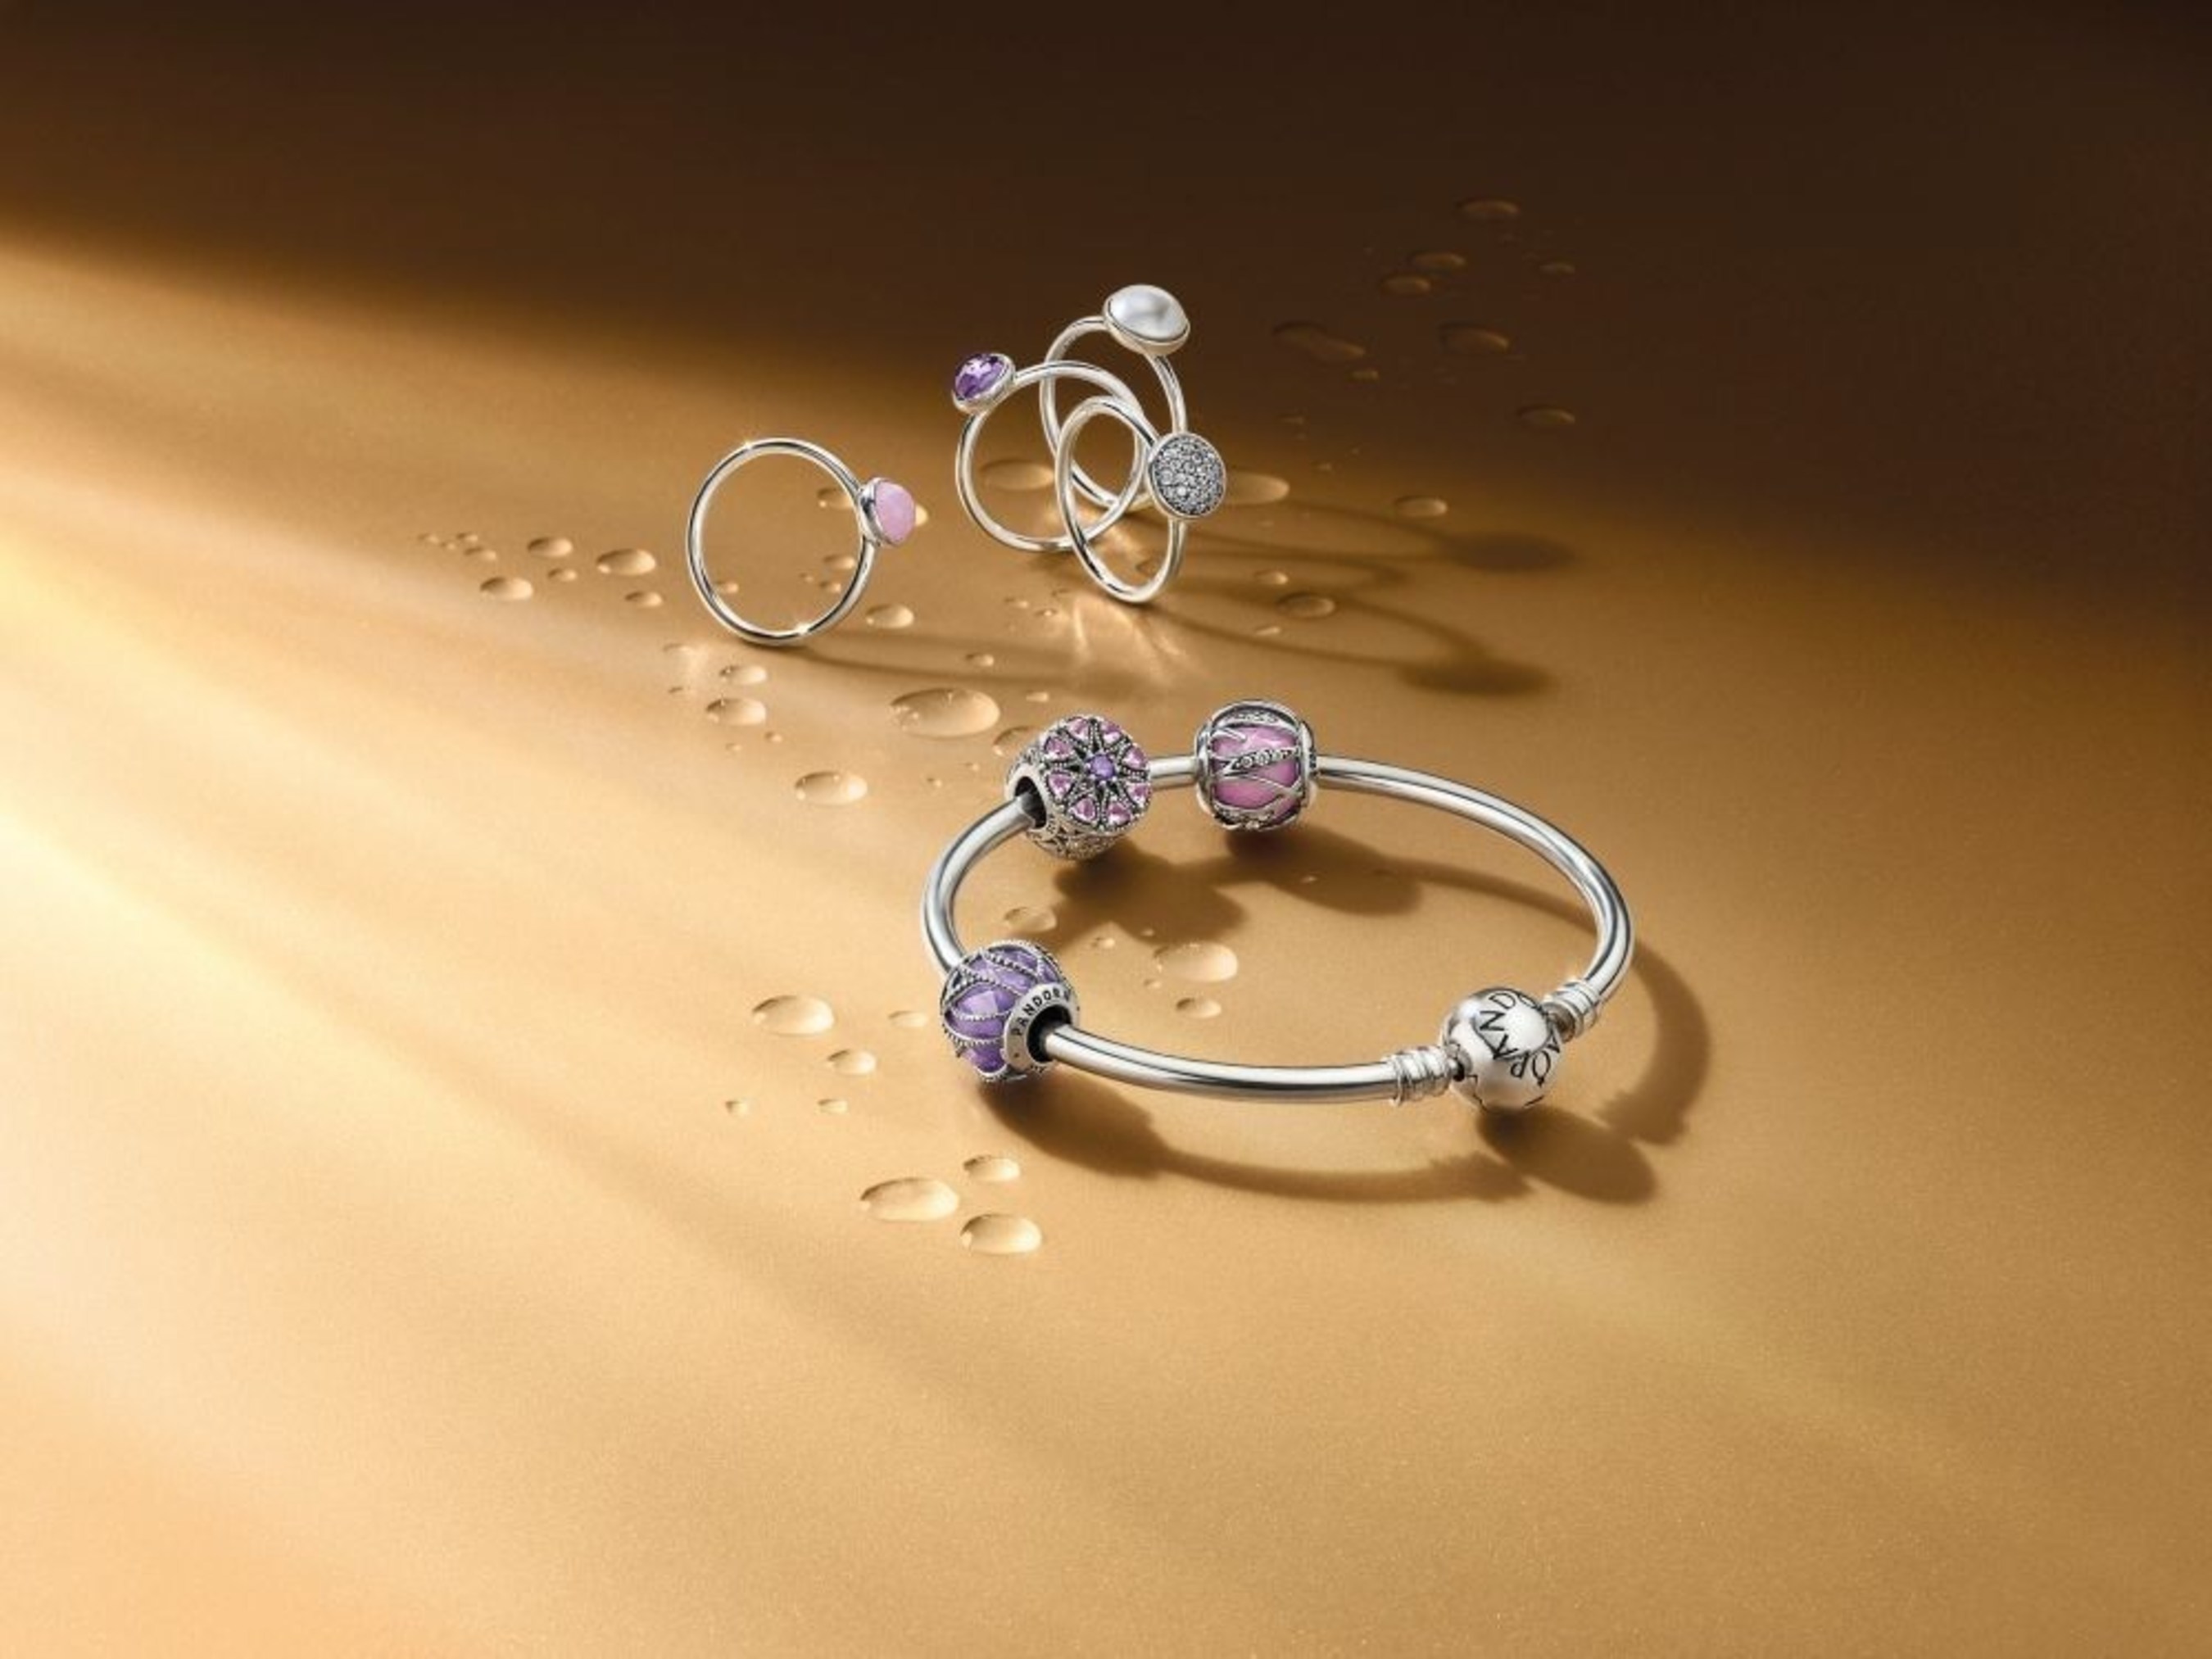 Pandora Jewelry Celebrates The Unique Style Of Every Woman With The Introduction Of "The Look Of You"